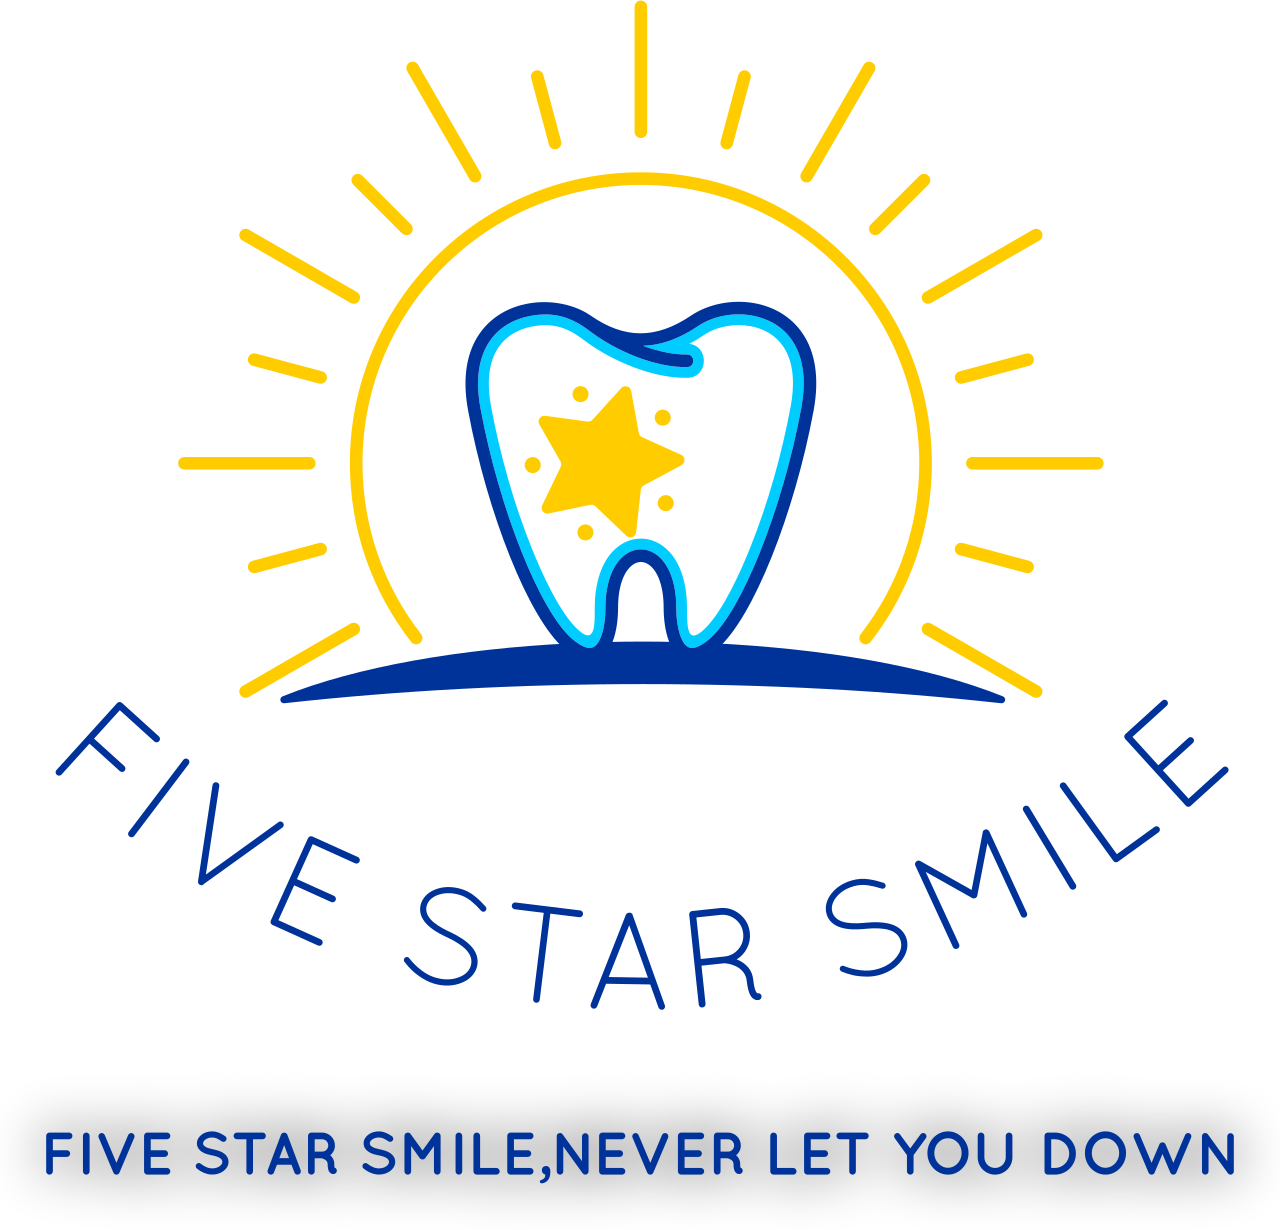 Five Star Smile's web page